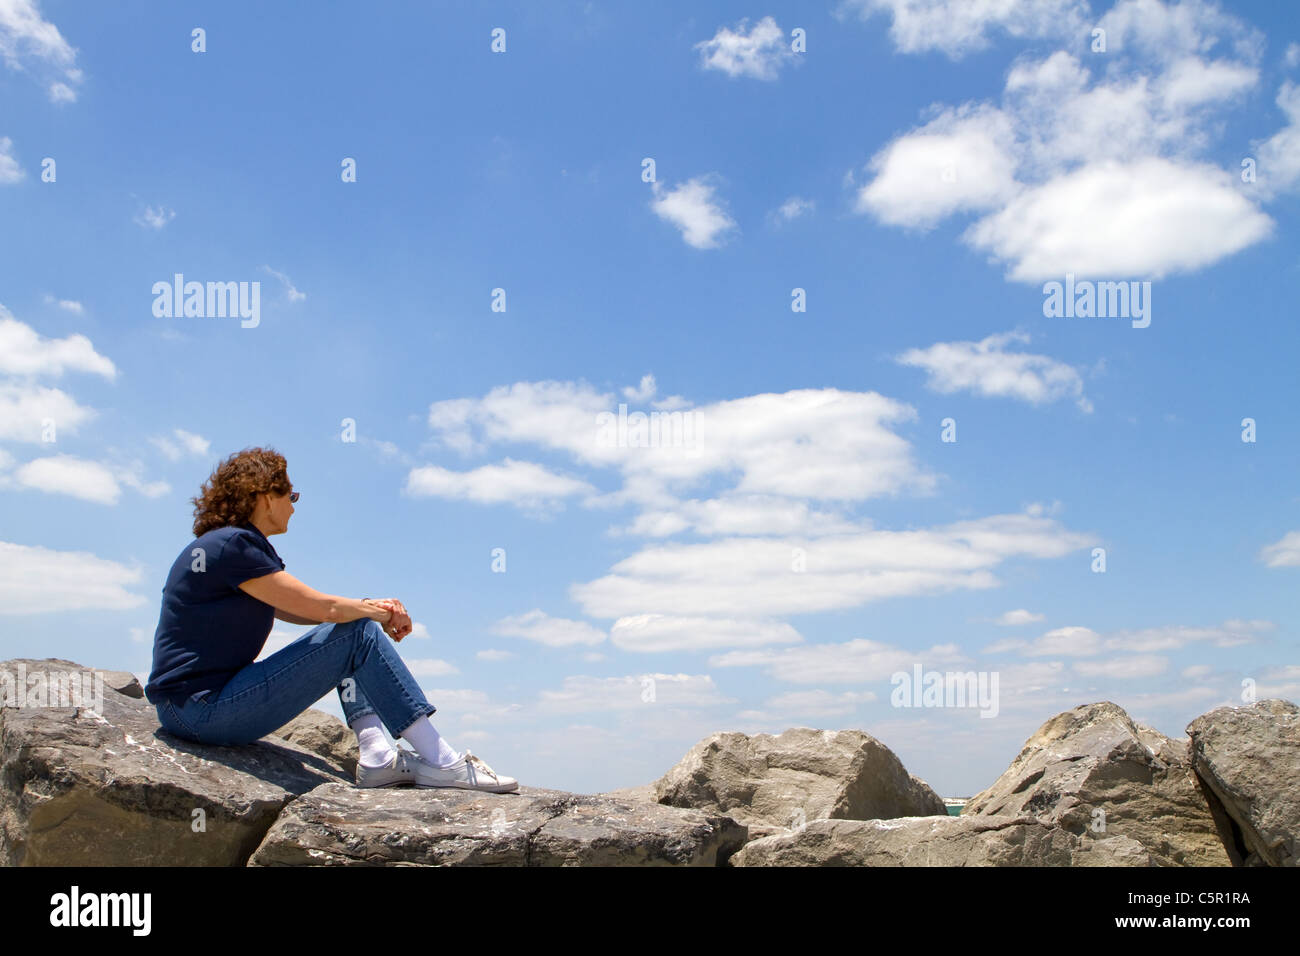 Meditating sixty year old mature woman sits on rocks and gazes out into a cloudy blue sky. Stock Photo